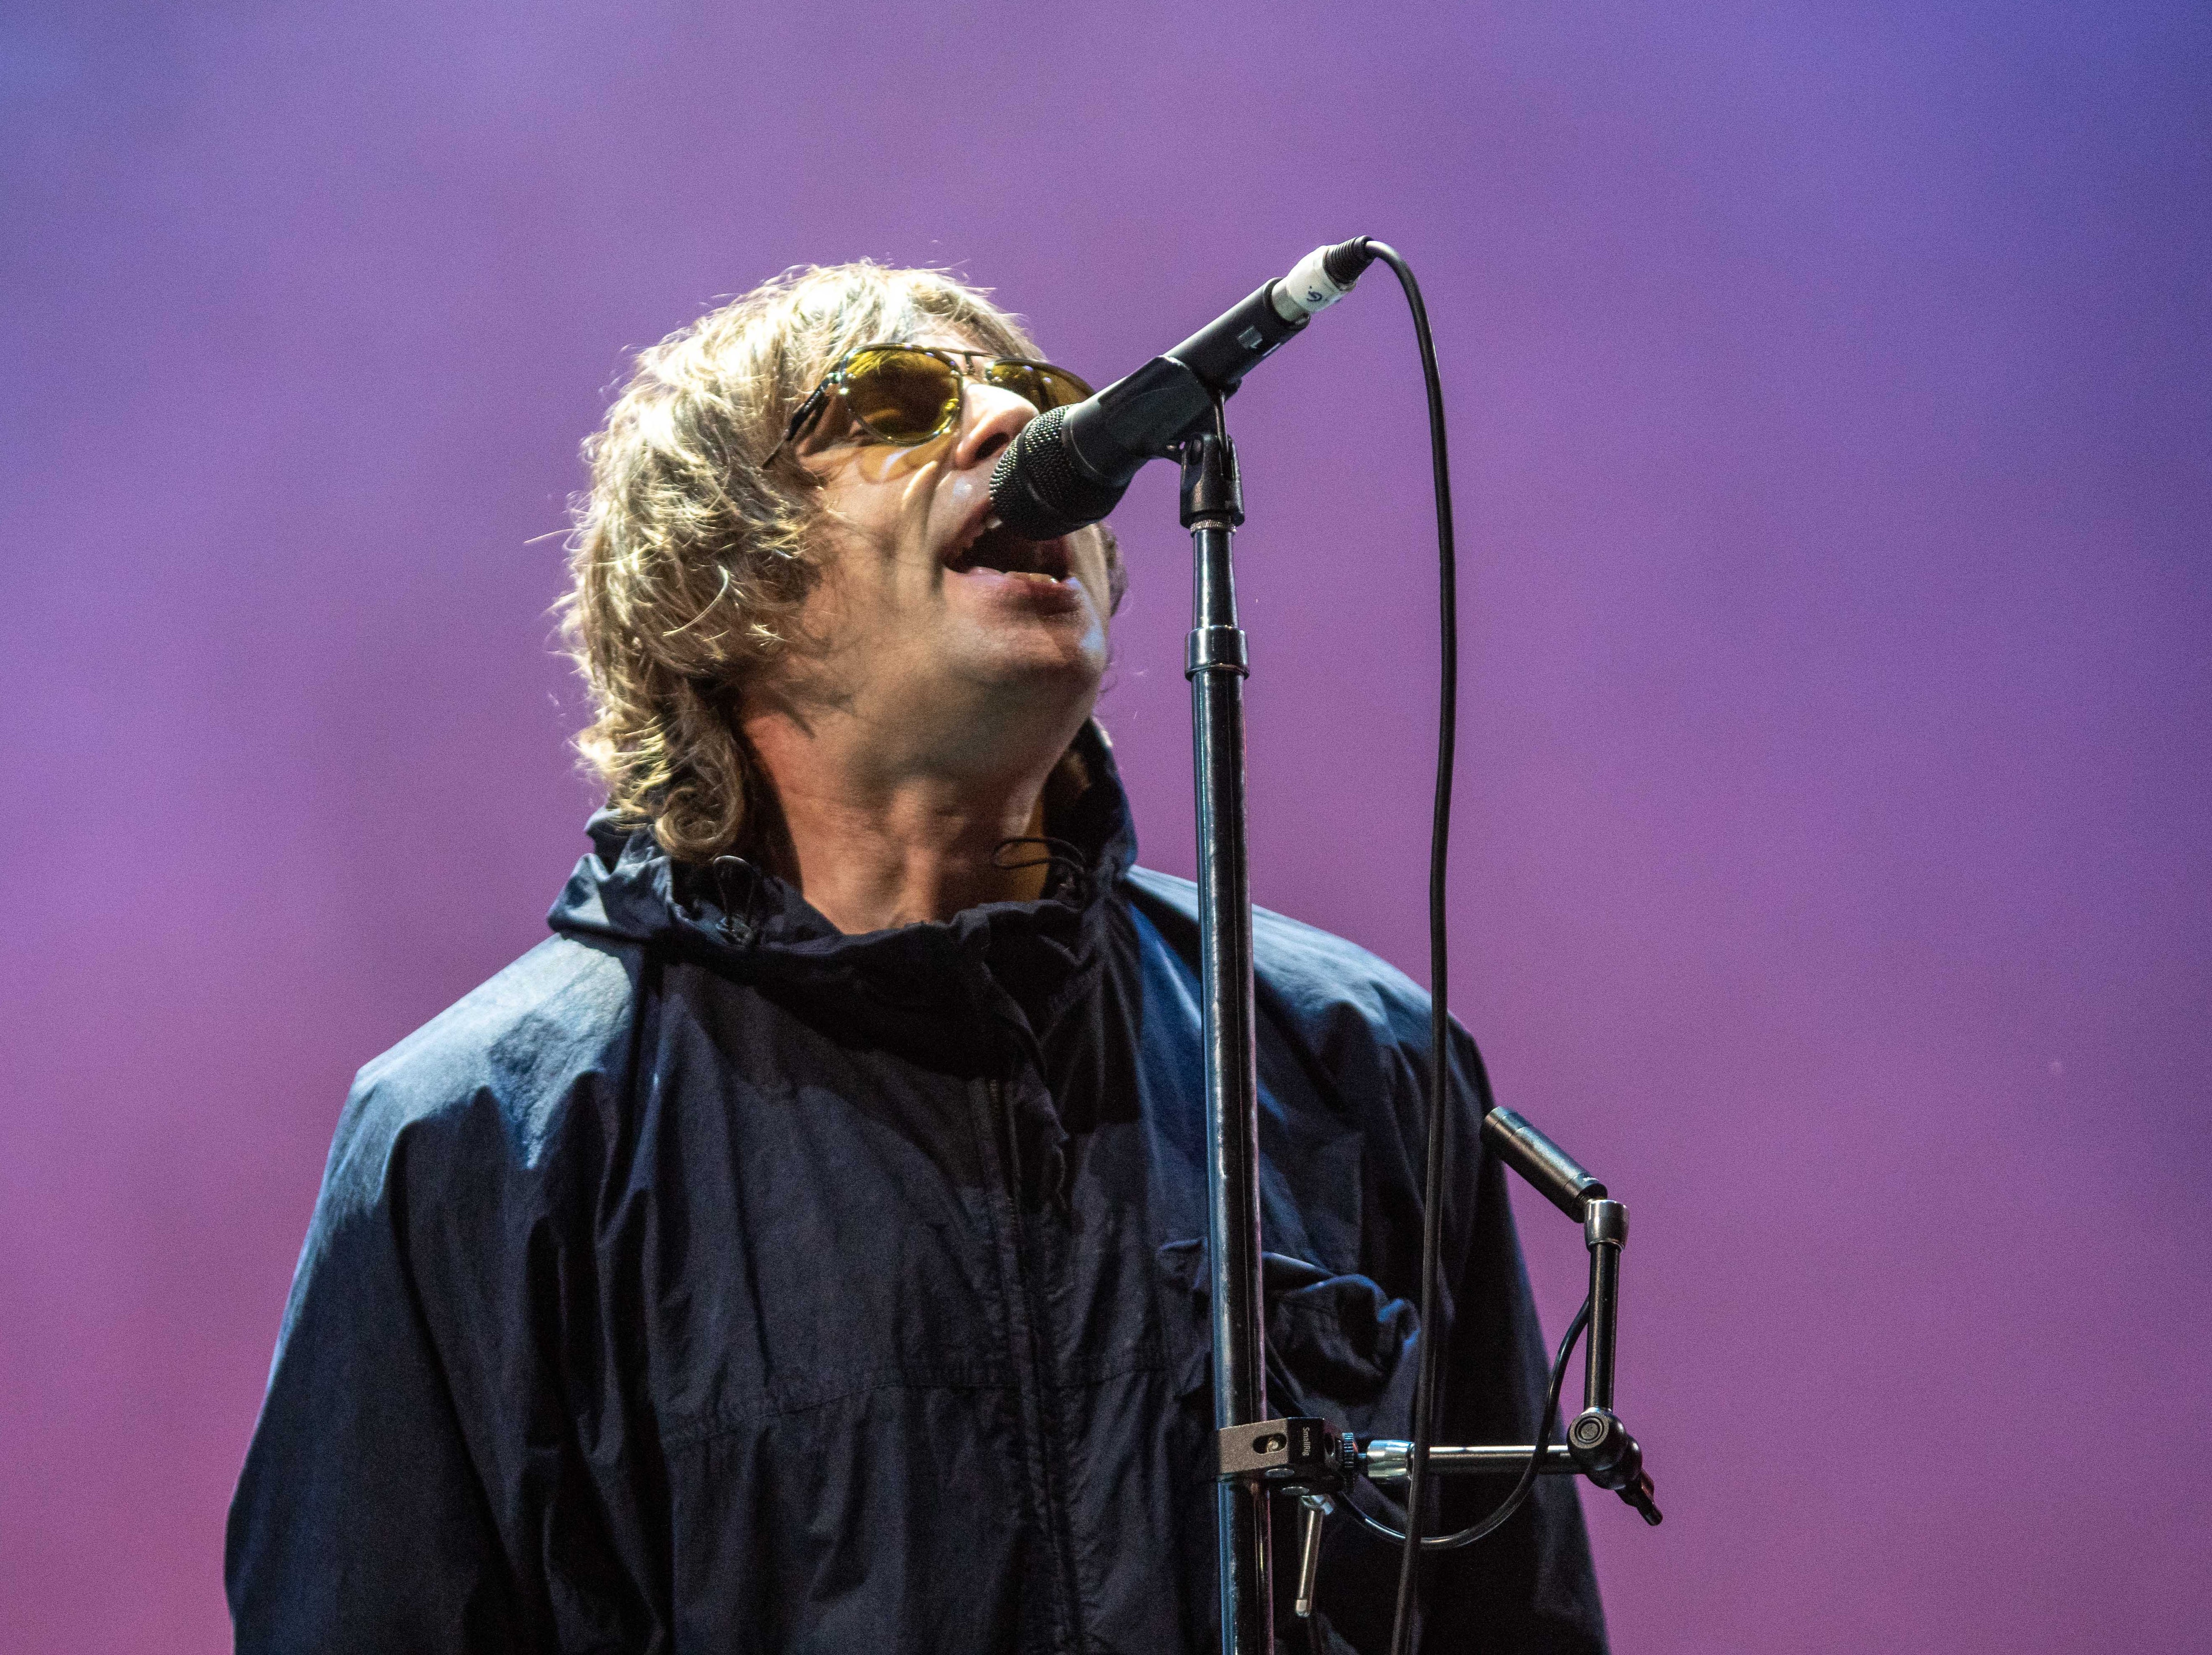 Glory days: Liam Gallagher turns back the clock with an Oasis-heavy set